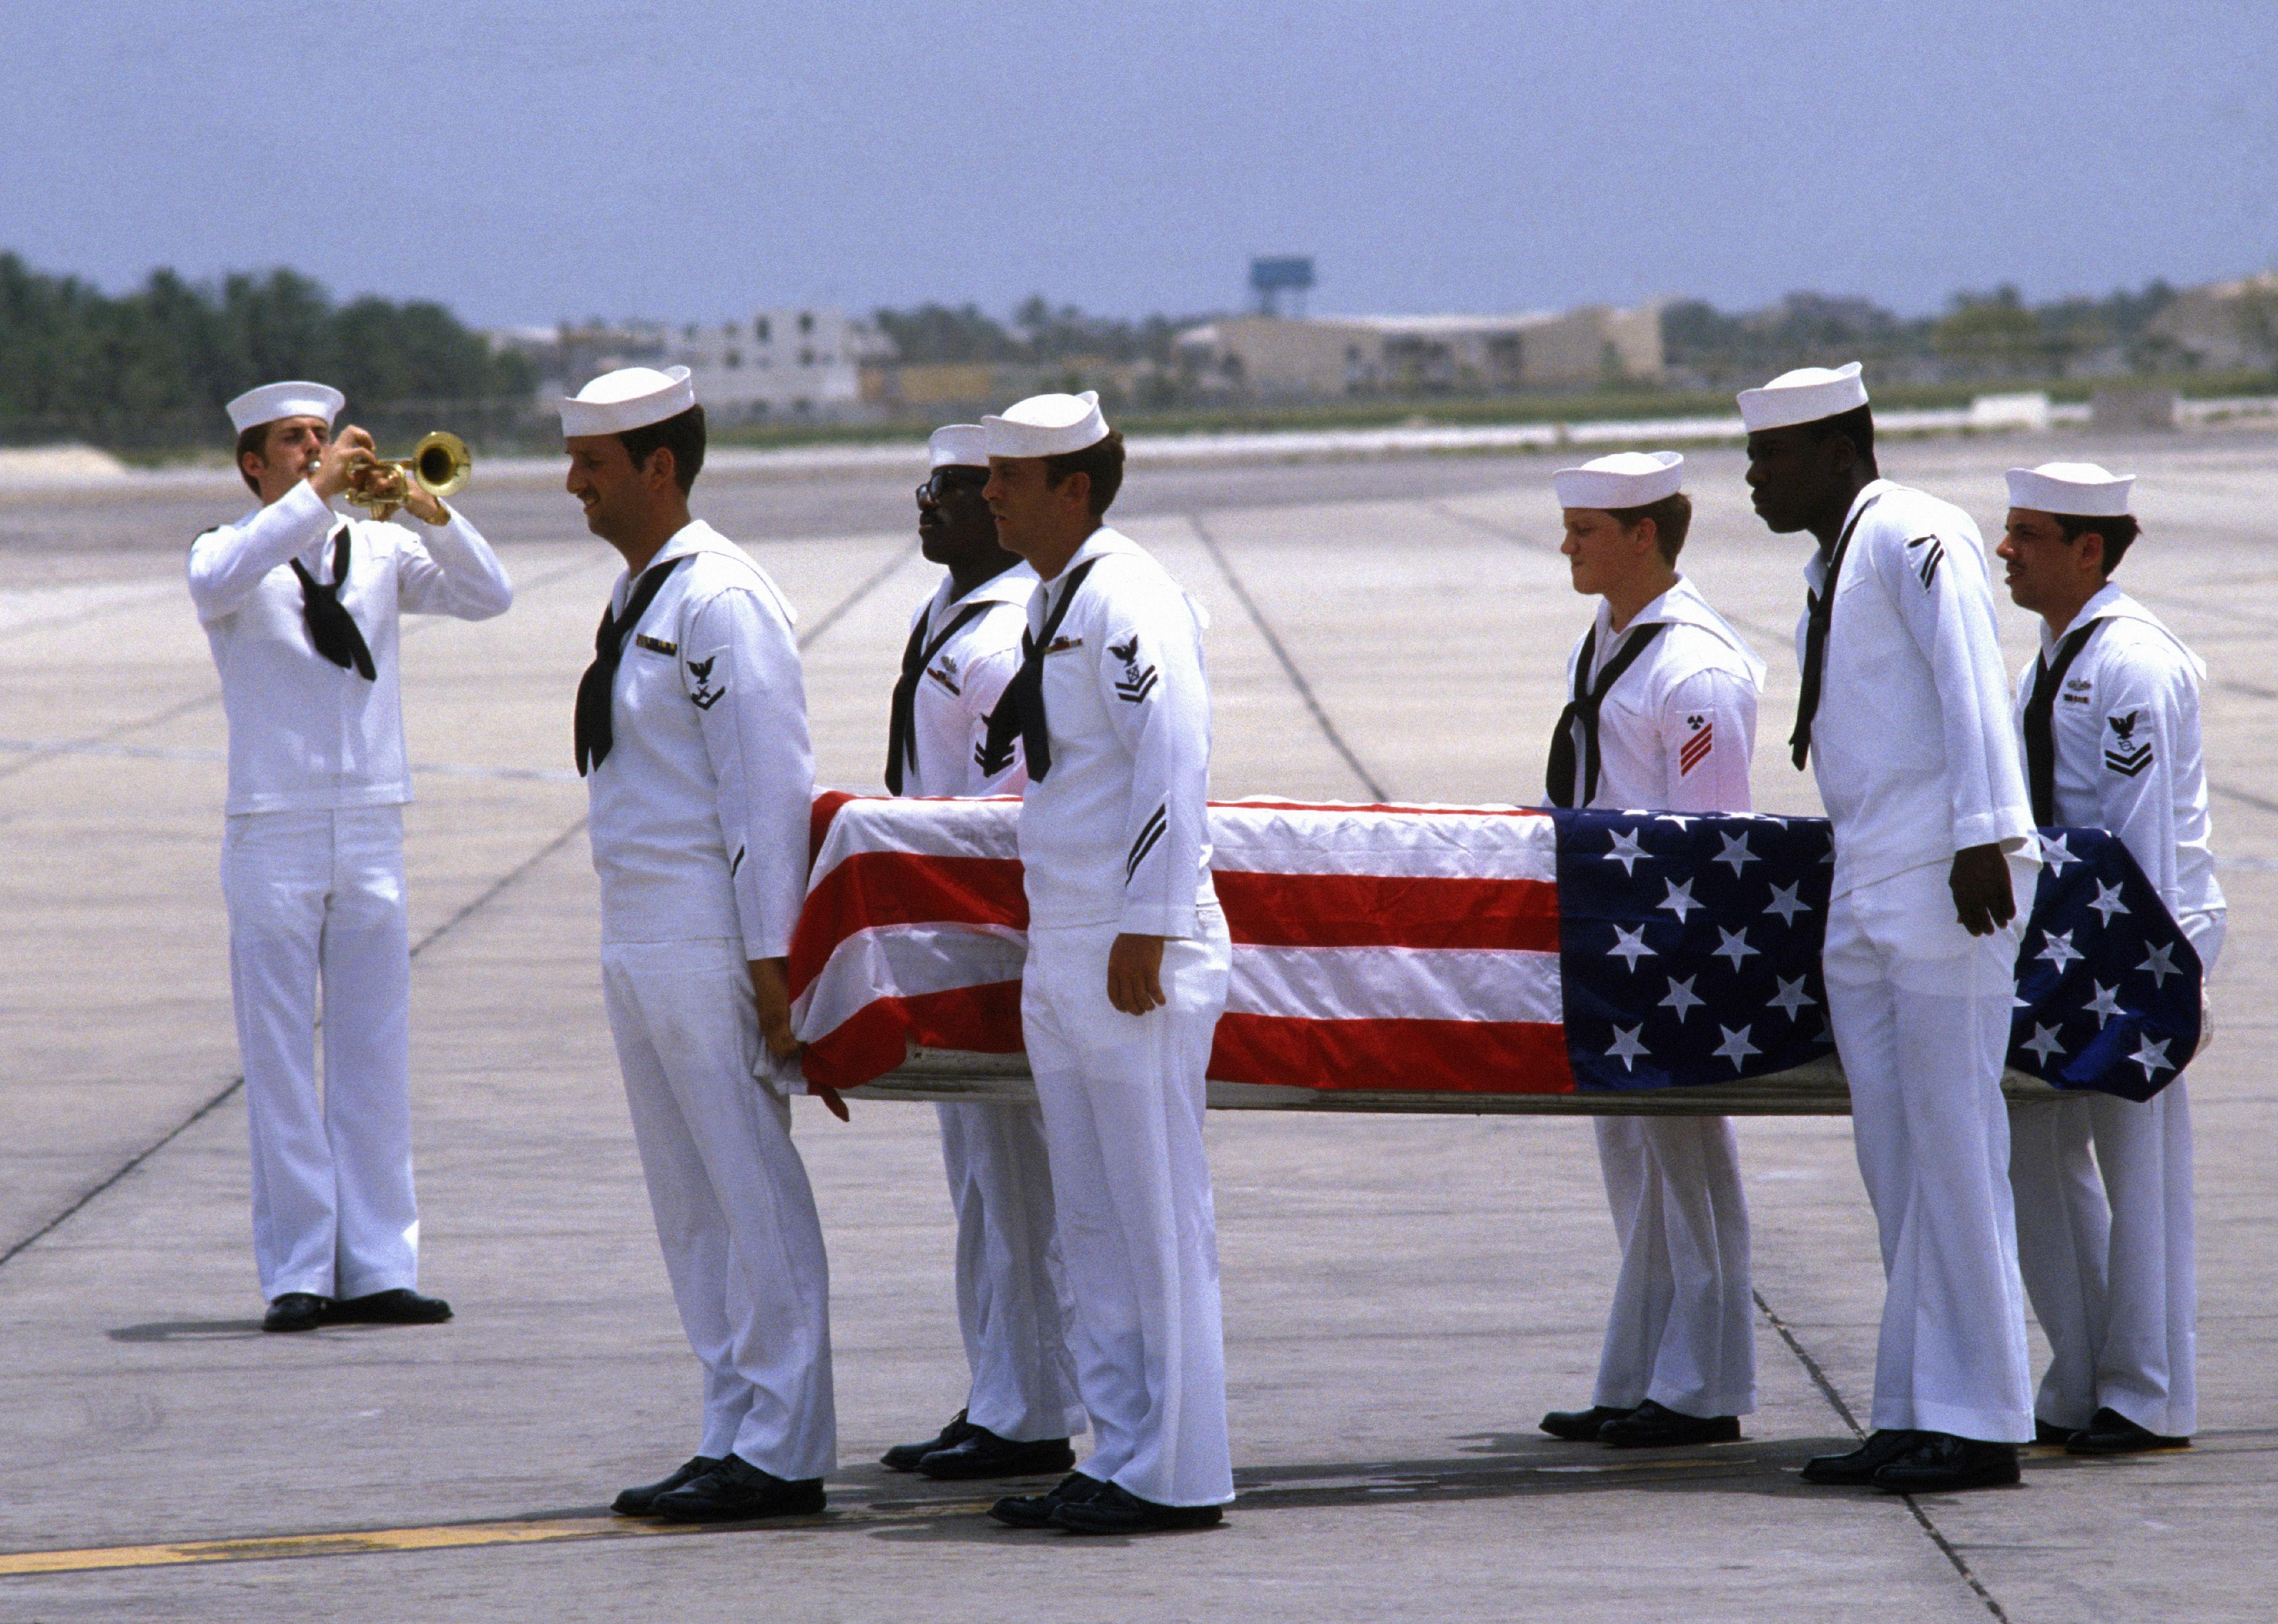 Navy sailors in uniform carrying a casket covered in a flag.